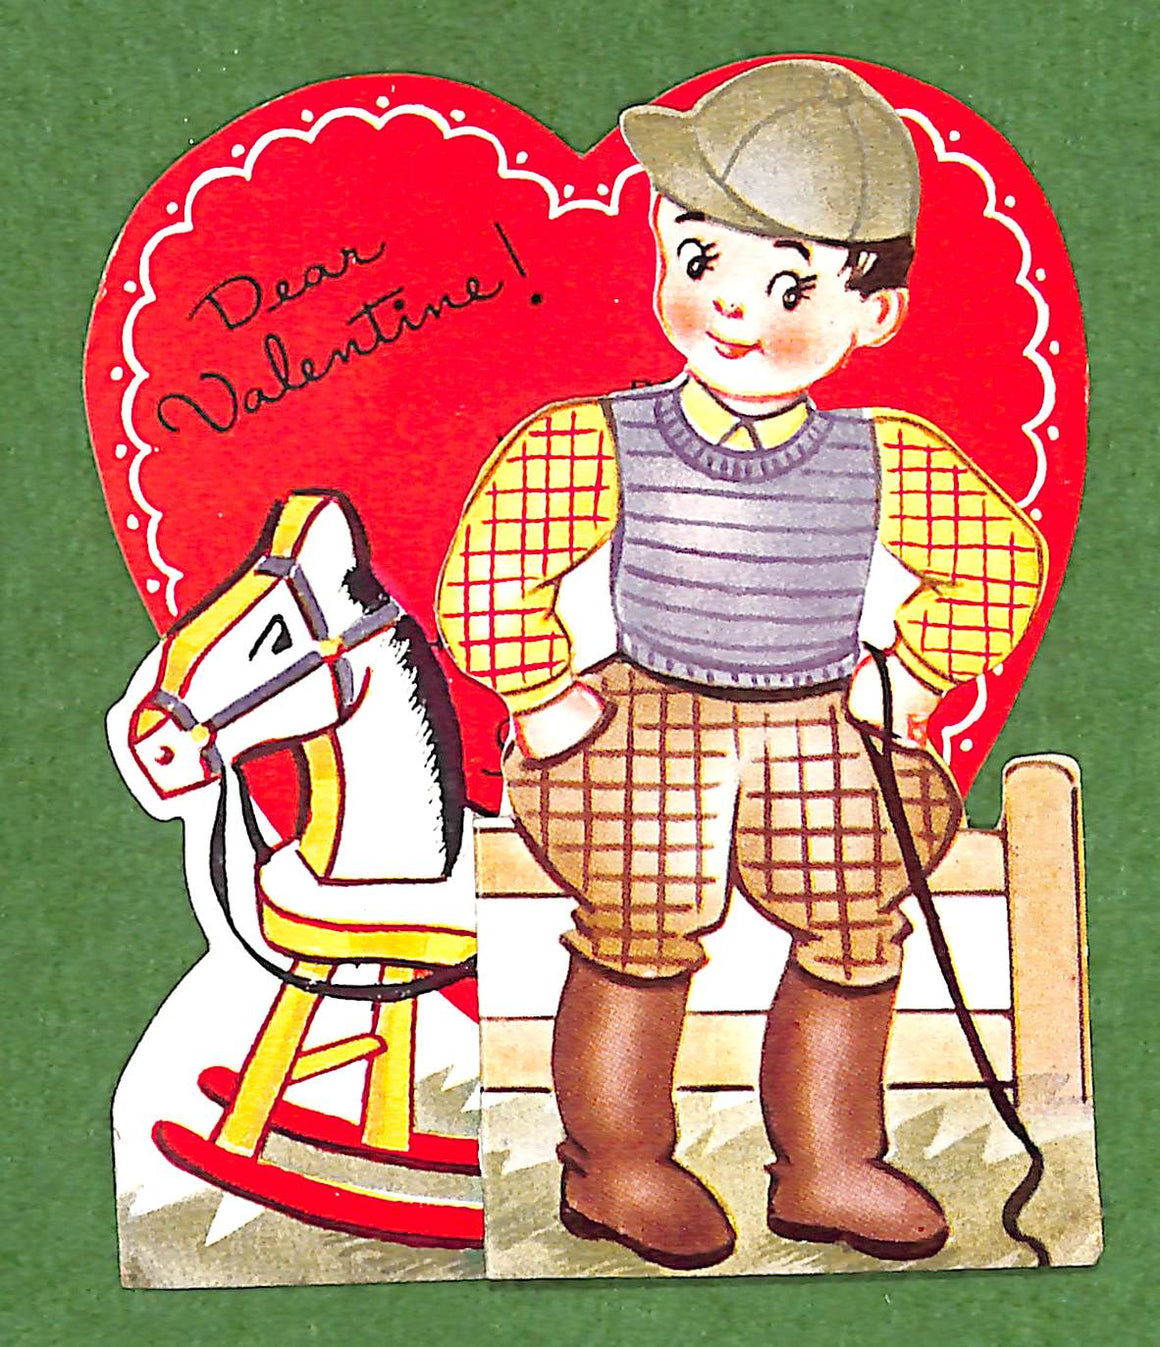 "Dear Valentine! Don't Want To "Nag" You About It- But How About "Jockeying" Your Heart Into "Harness" With Mine? I Love You!" Valentine Card